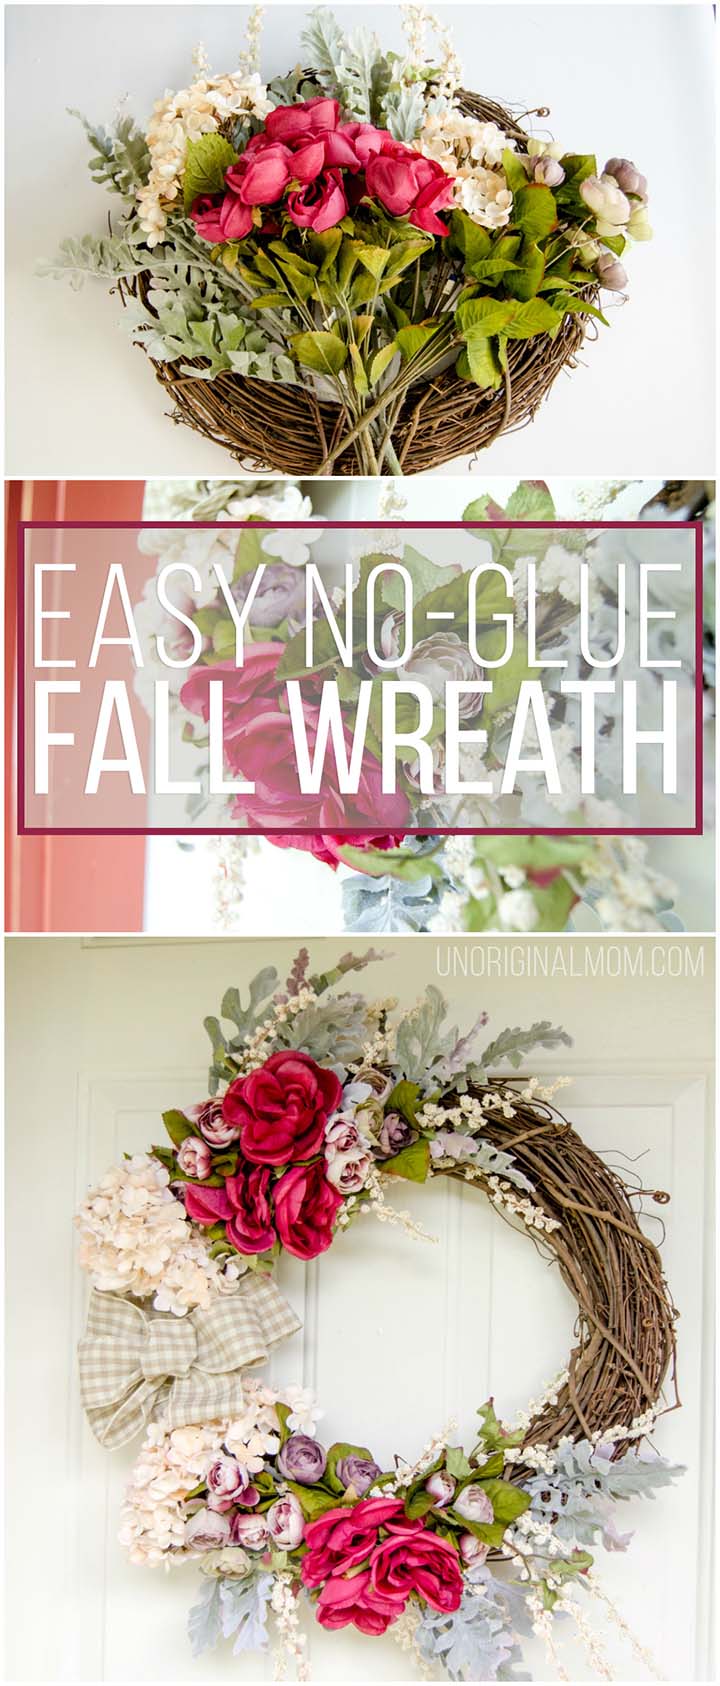 Create your own beautiful fall wreath in less than 30 minutes - you don't even have to use glue! | no-glue wreath tutorial | fall wreath | neutral fall wreath | fall front porch #fallwreath